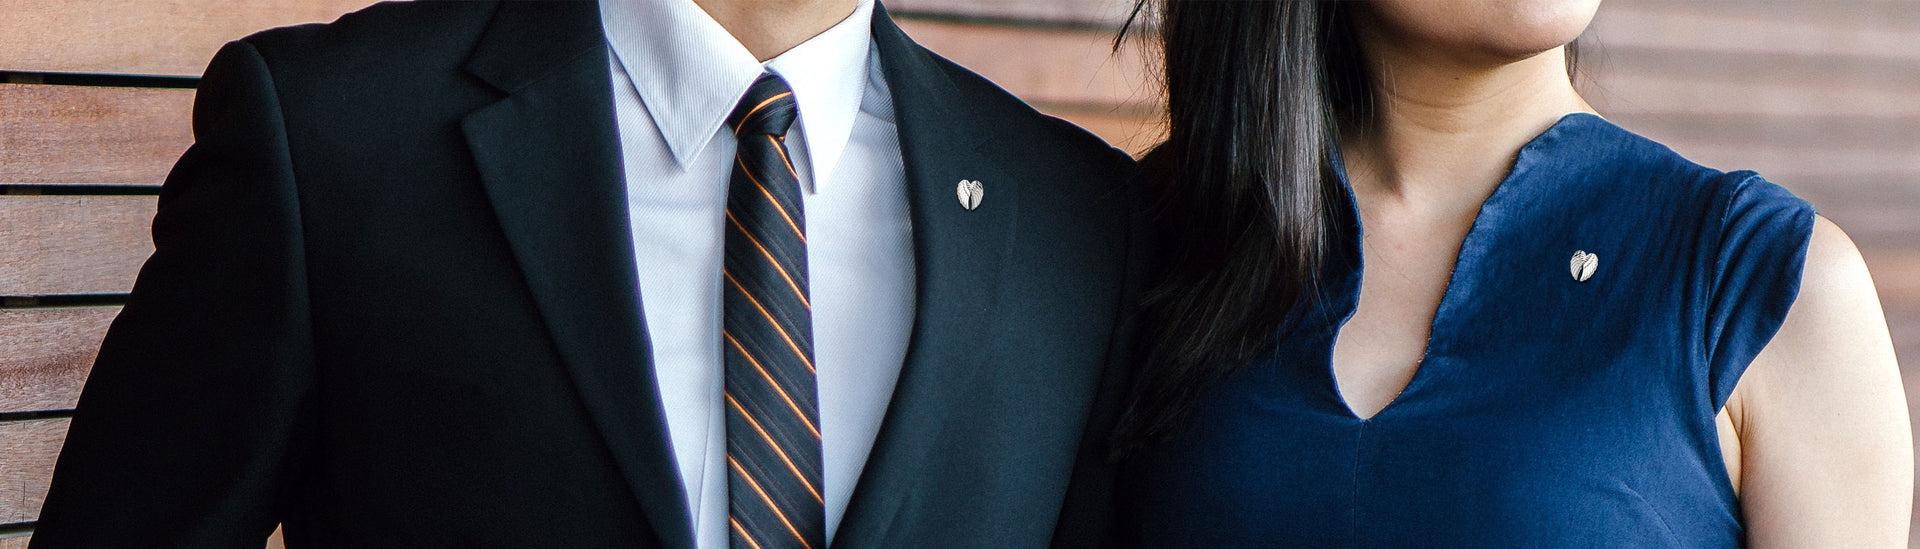 Smart dressed man and woman wearing Angel Wings Pins